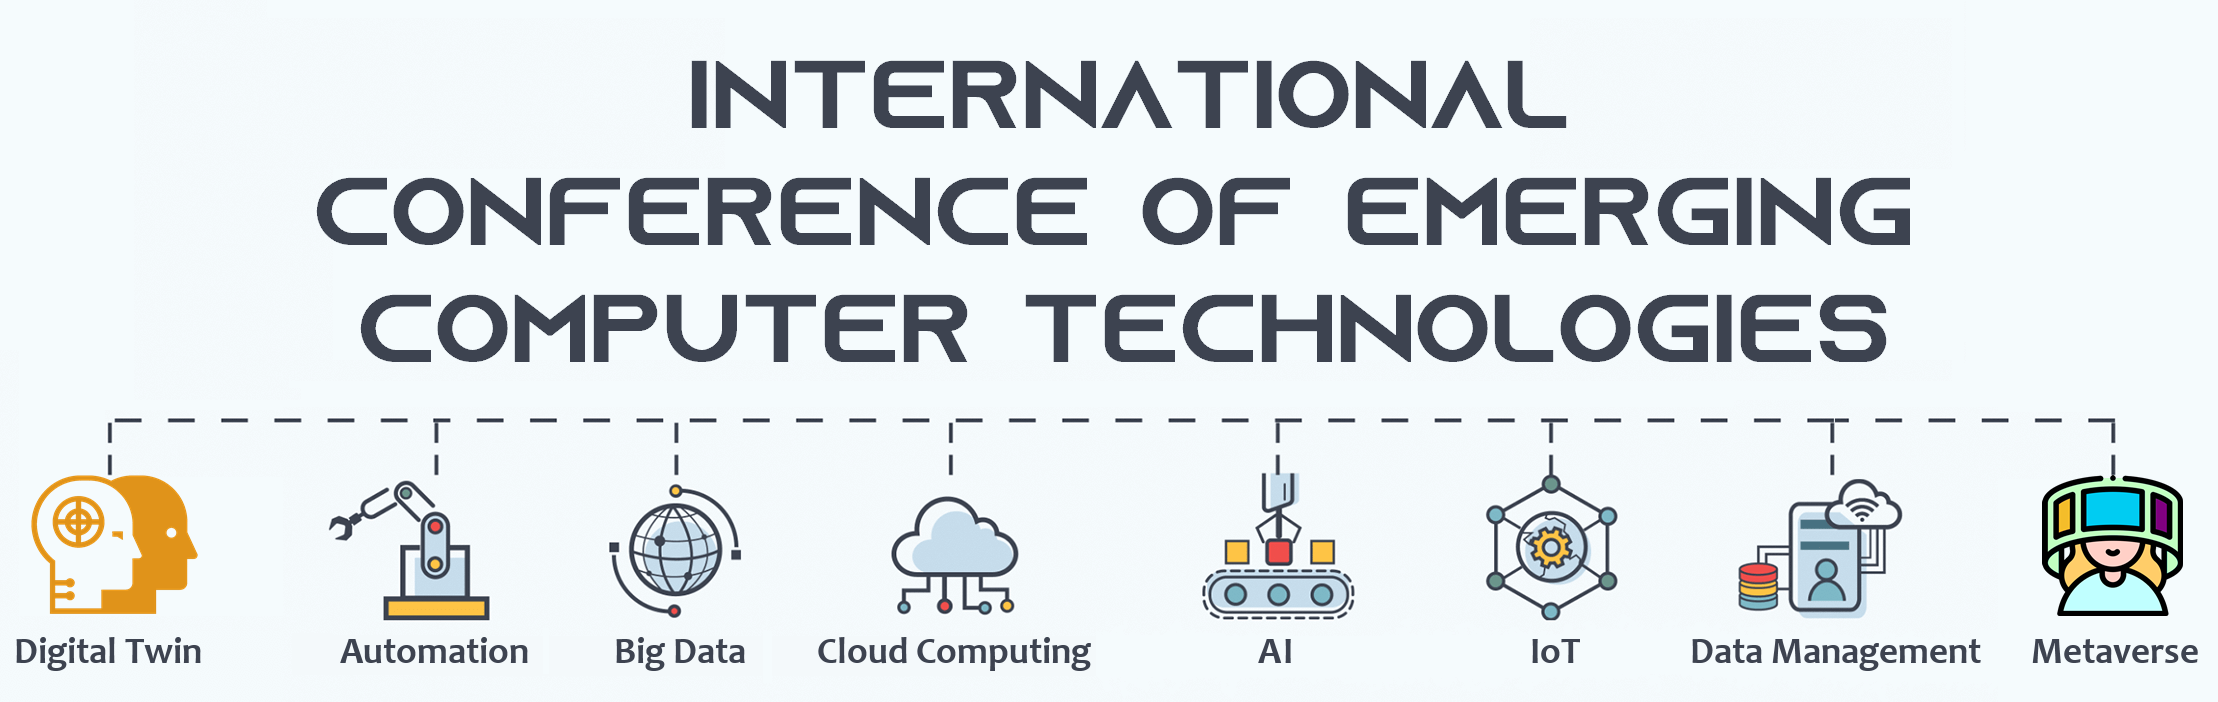 International Conference of Emerging Computer Technologies ICECT 2021